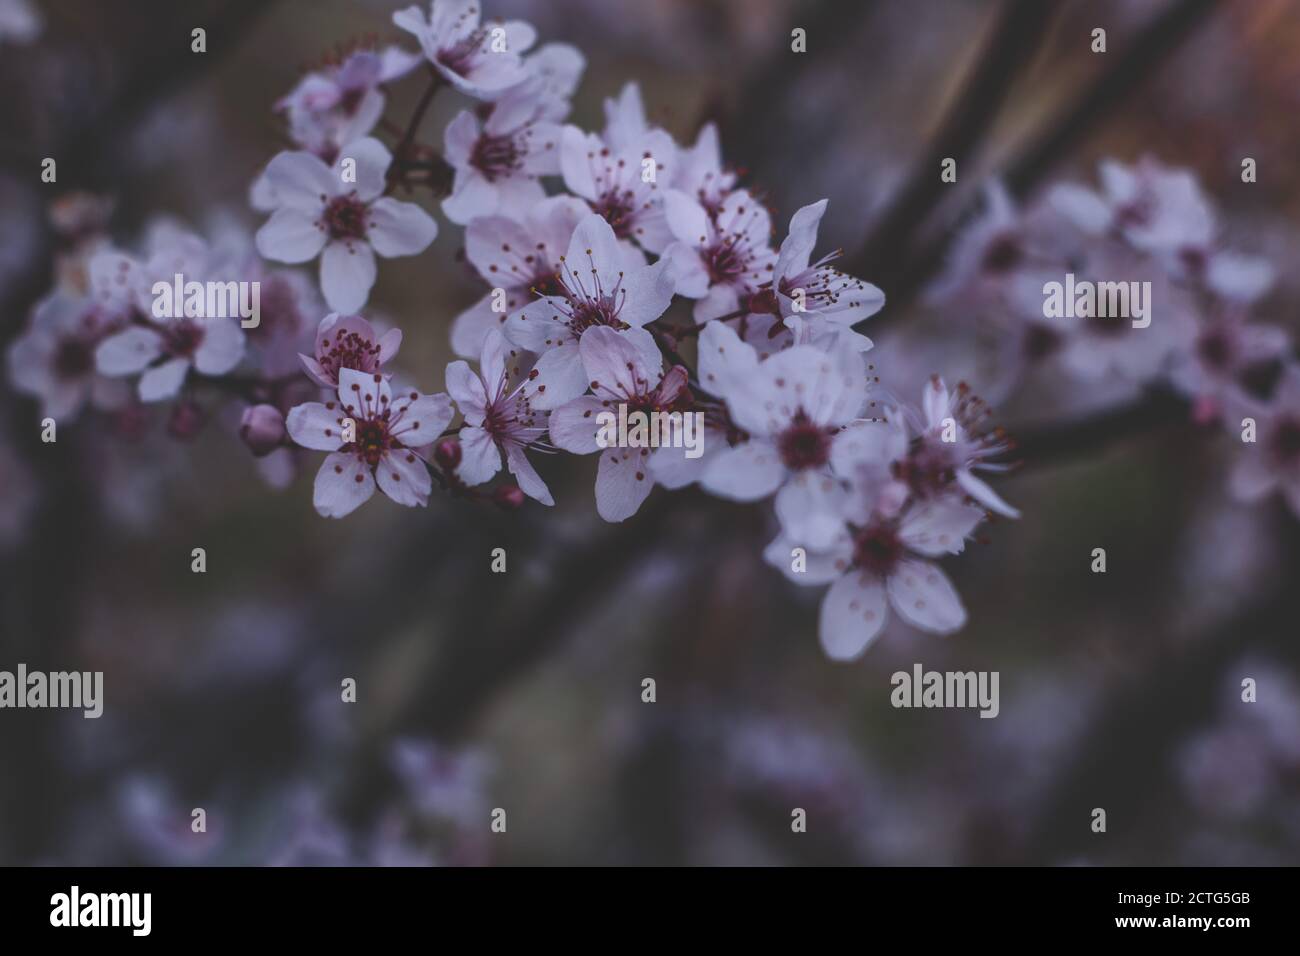 Spring flowers, blossom, nature Stock Photo